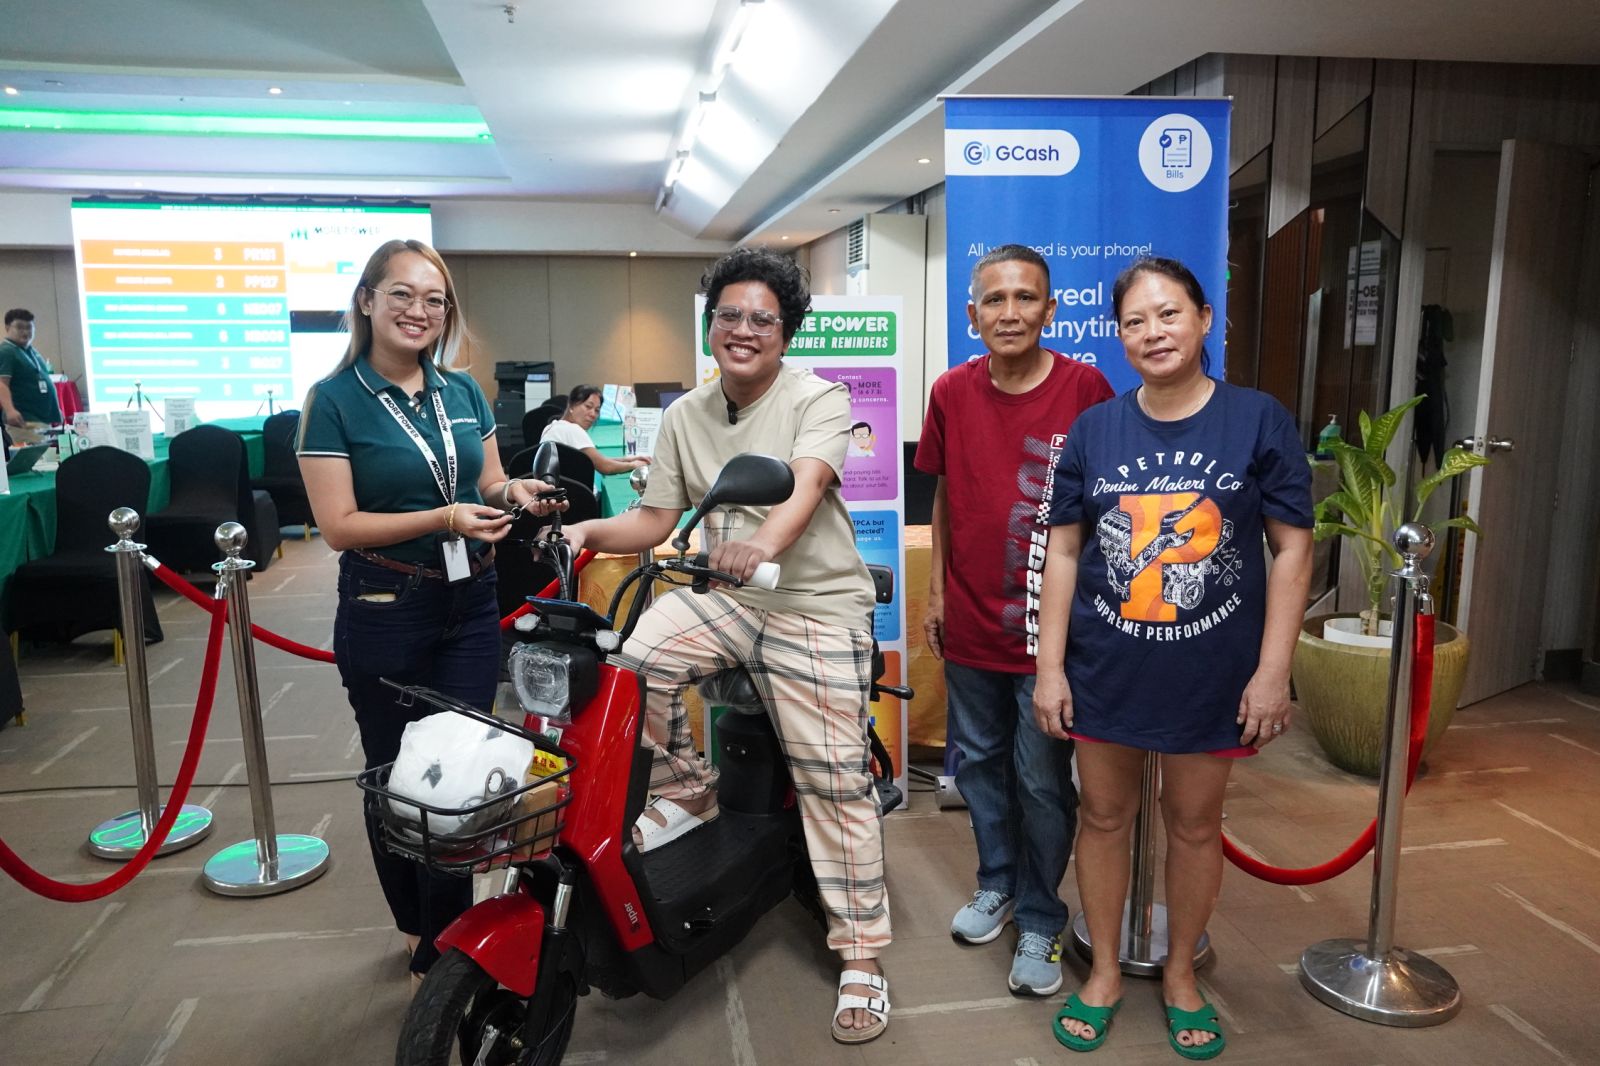 The turnover of e-bike to the winner Philip June Gelilang